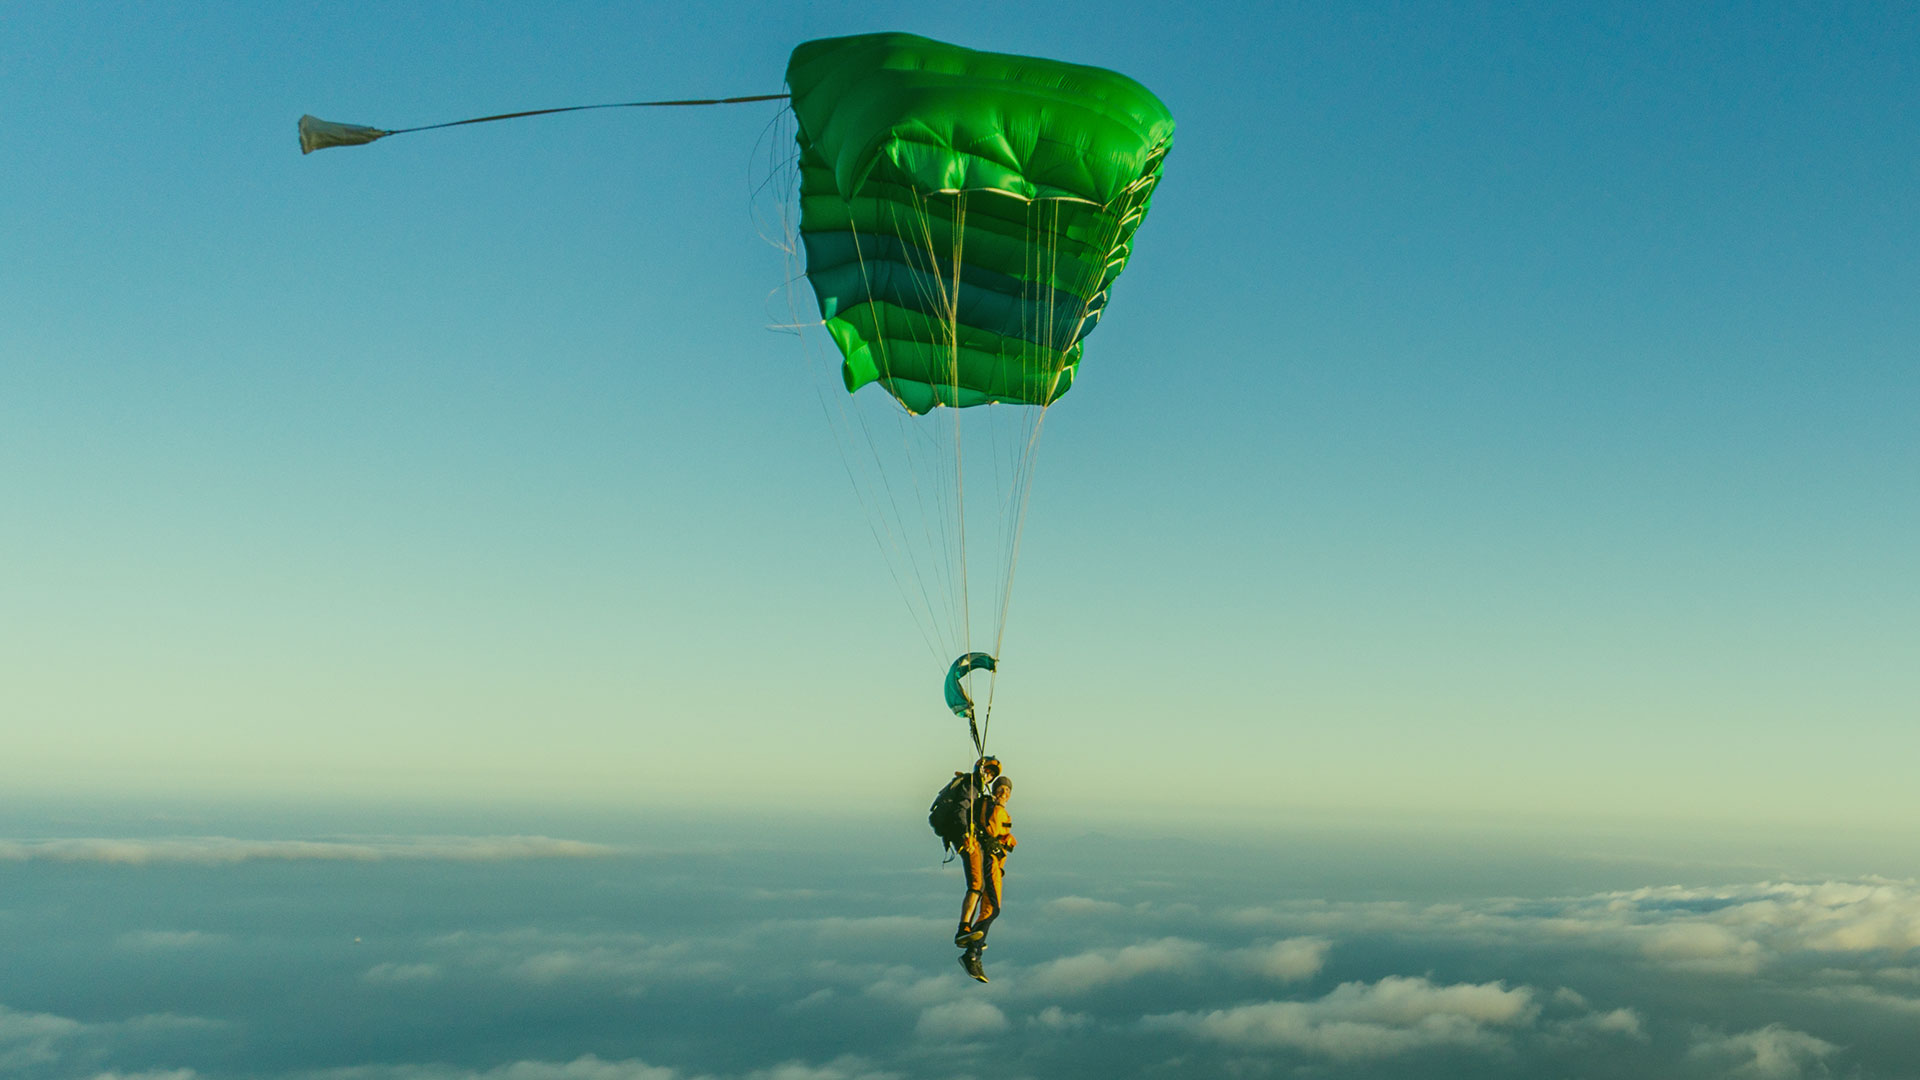 Skydiving above New Zealand when the parachute opens